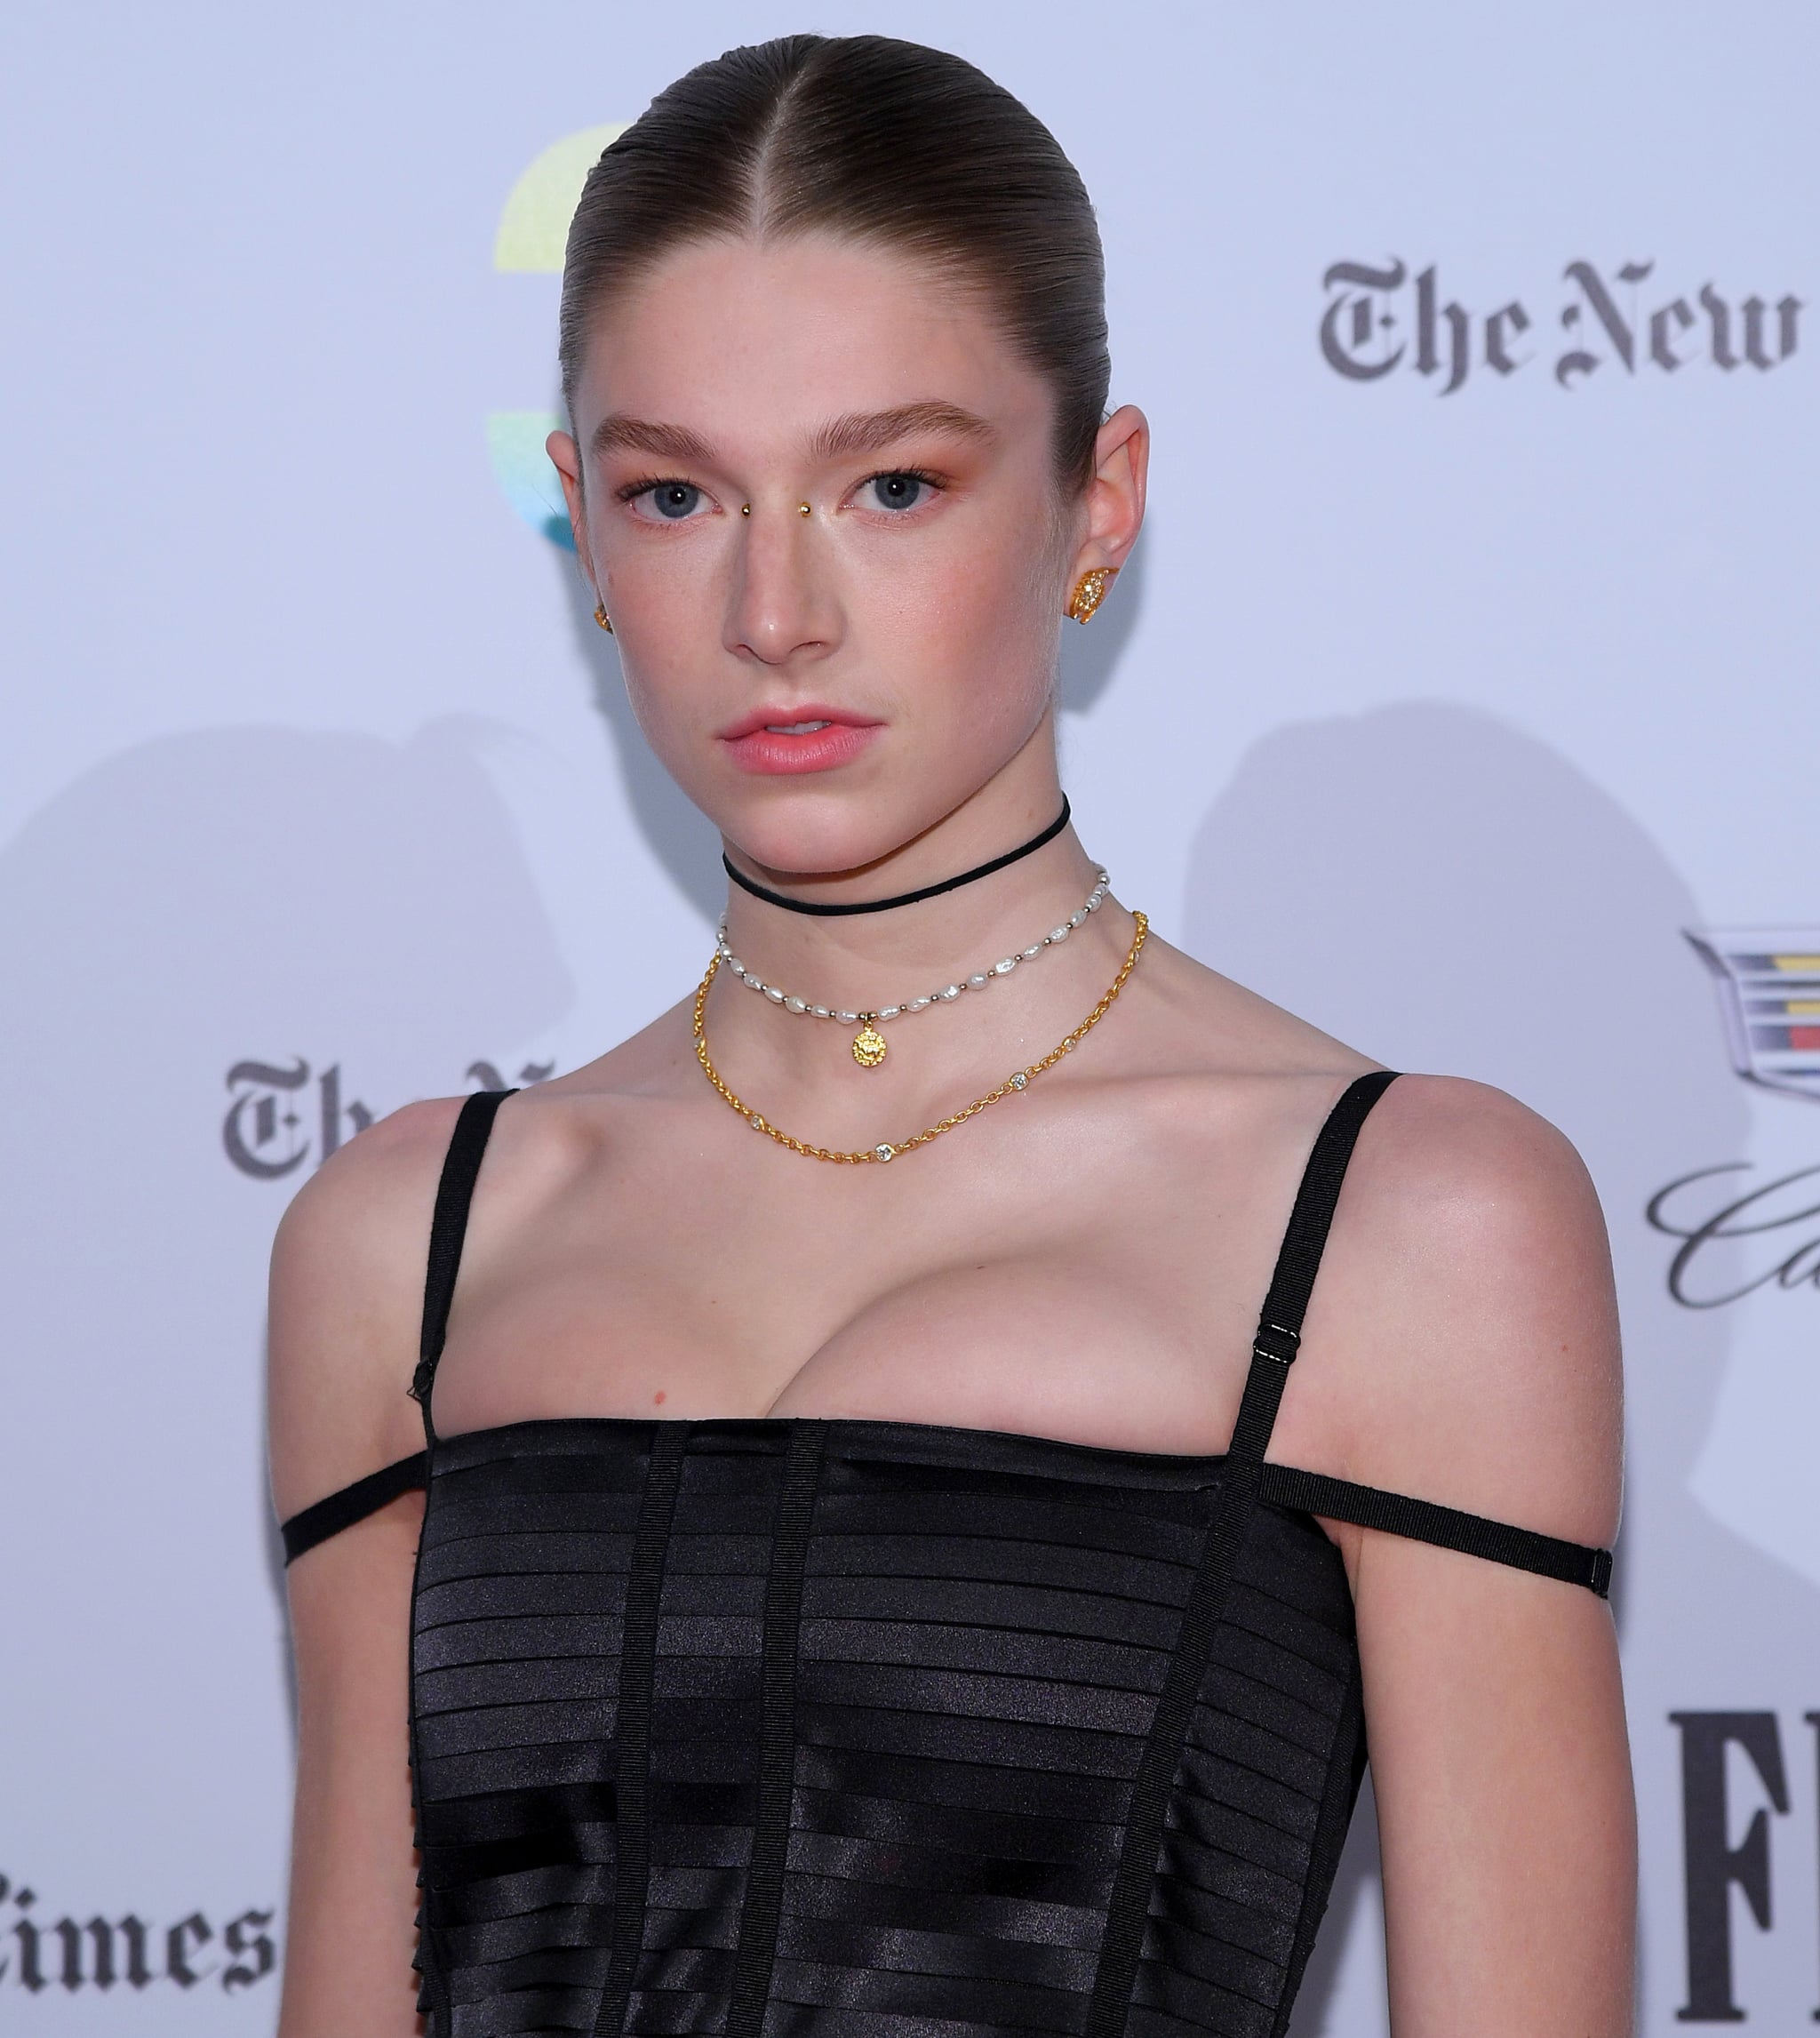 NEW YORK, NEW YORK - JANUARY 11: Hunter Schafer attends the 30th Annual IFP Gotham Awards at Cipriani Wall Street on January 11, 2021 in New York City. (Photo by Dimitrios Kambouris/Getty Images for 30th Annual IFP Gotham Awards)